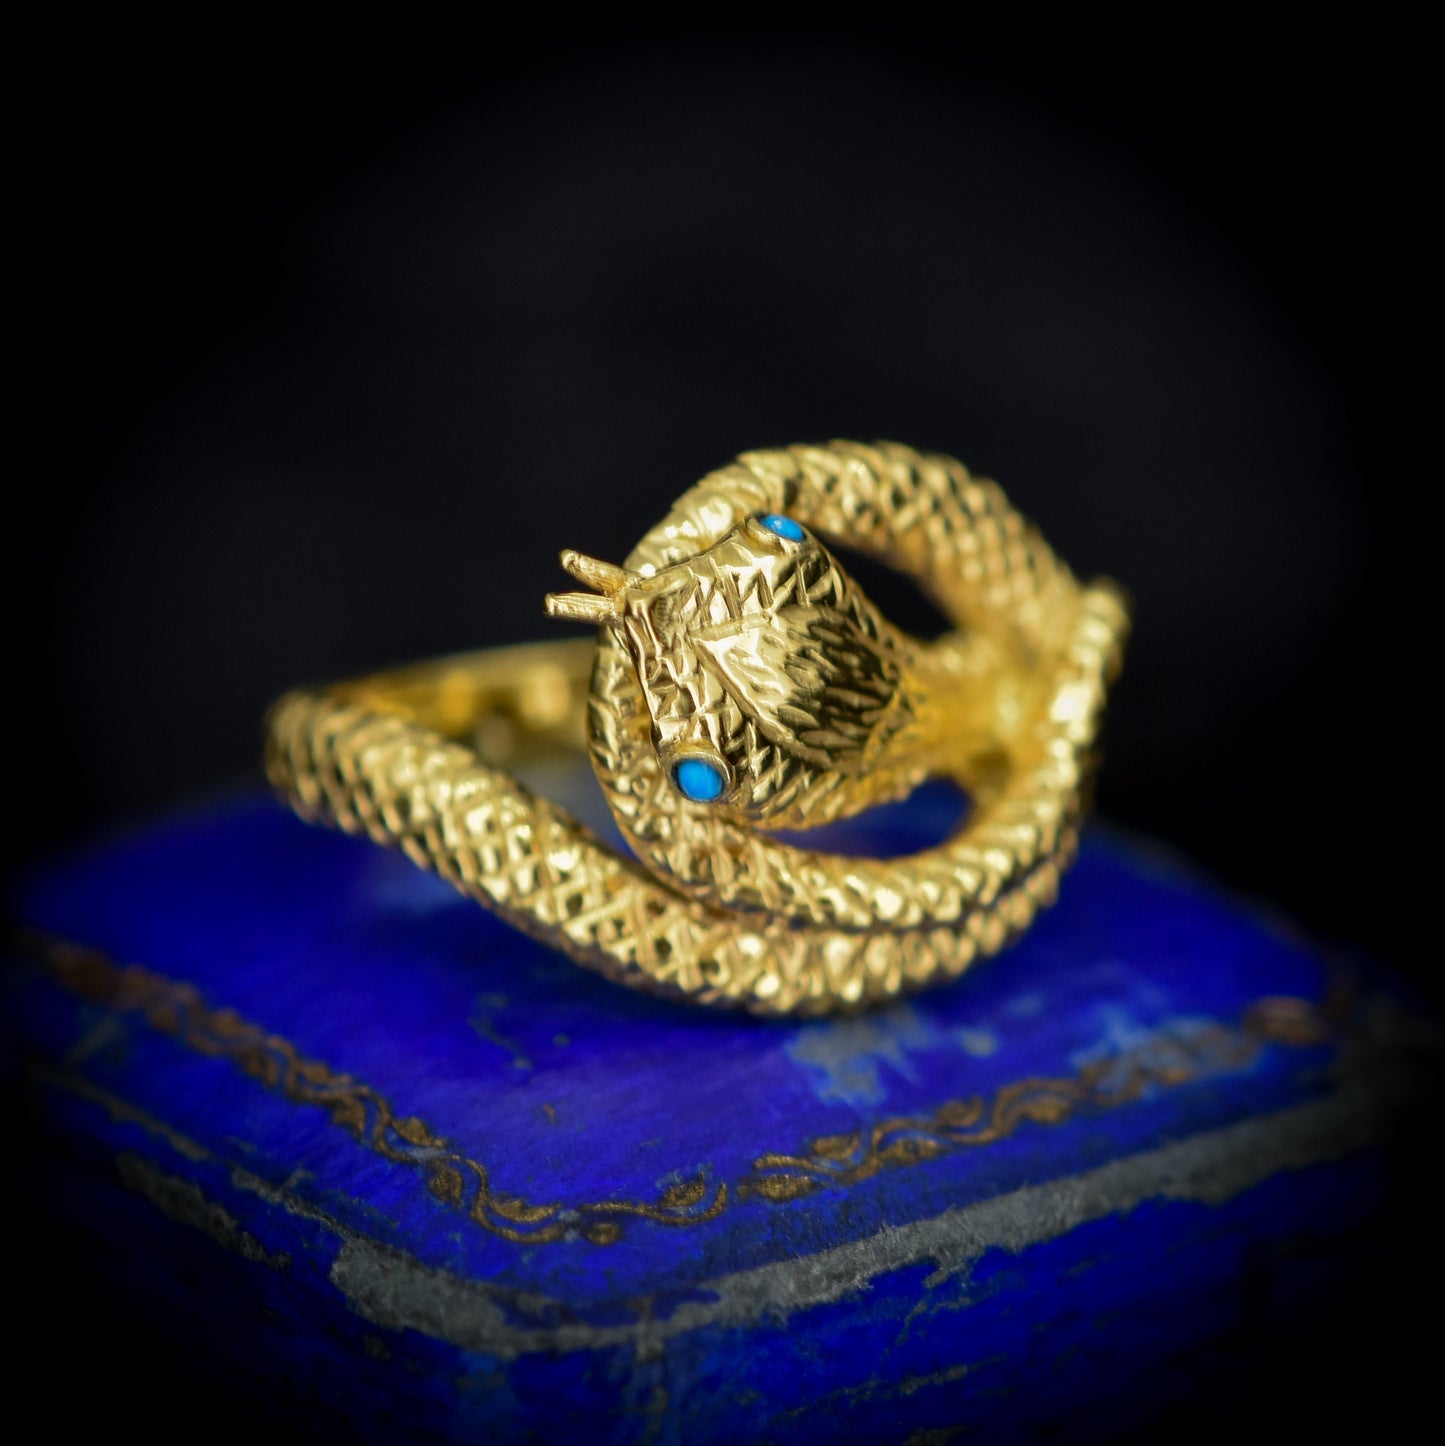 Turquoise Coiled Snake Serpent 18ct 18K Yellow Gold on Silver Ring | Antique Victorian Style